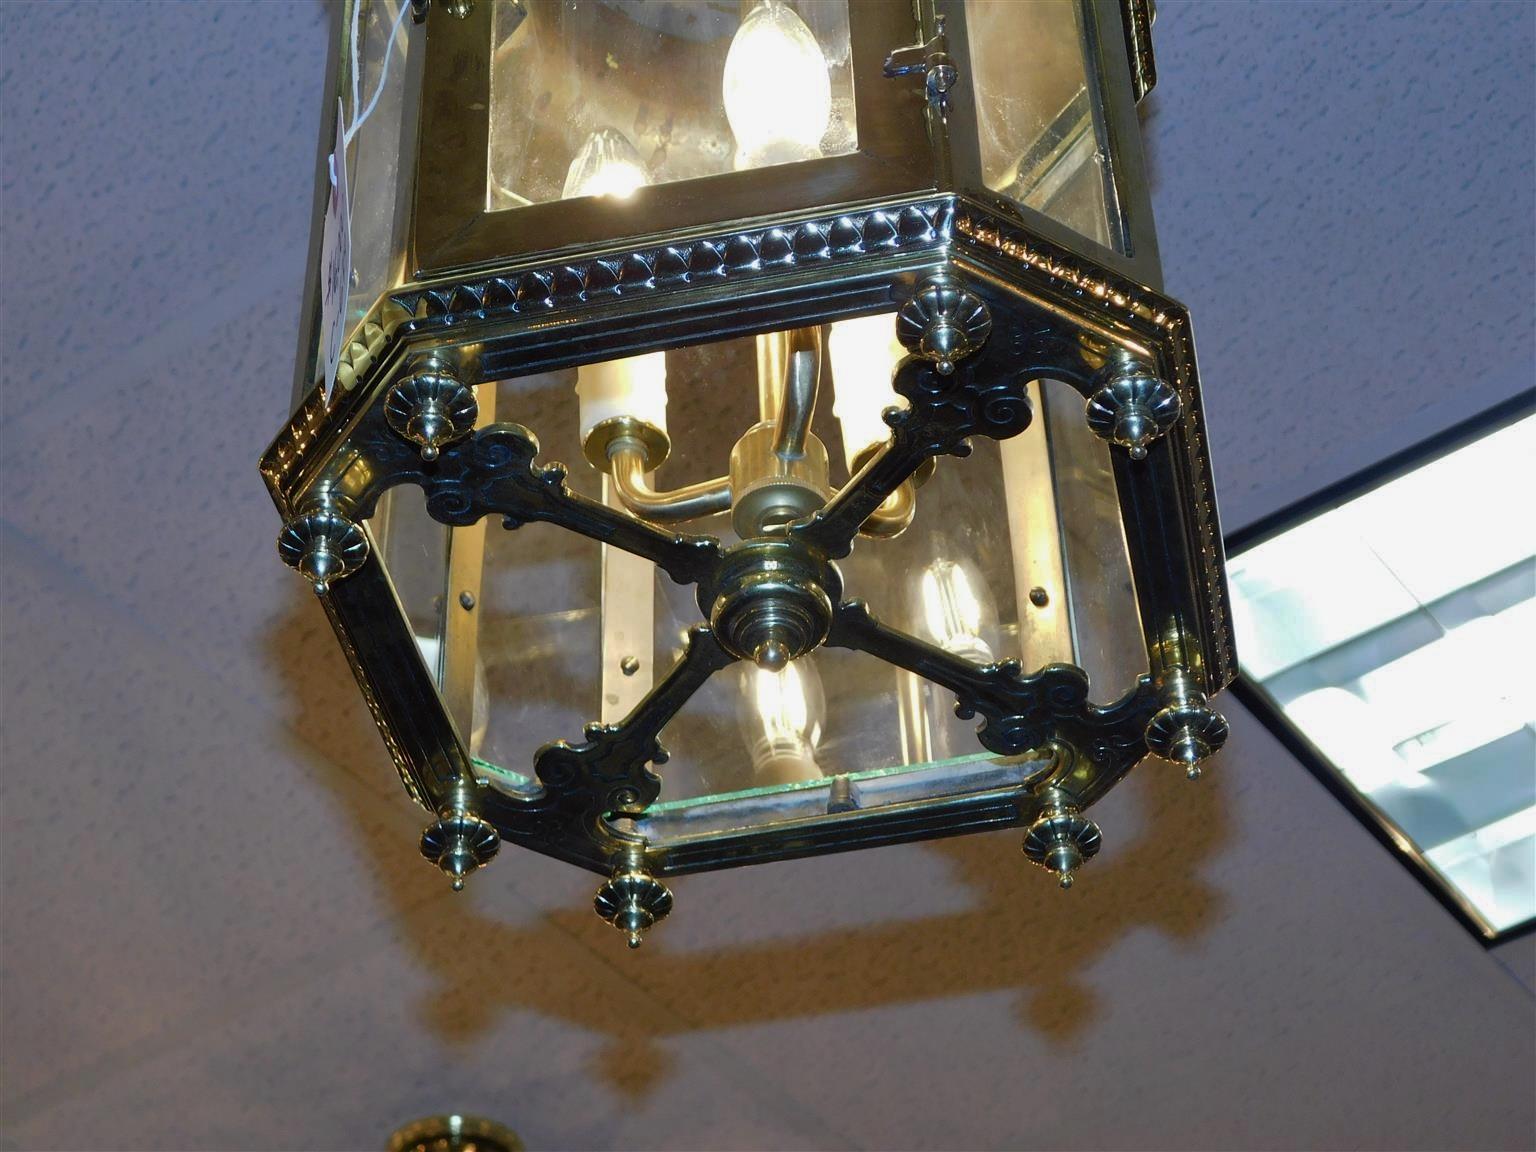 English Brass Octagon Decorative Chased Dome Glass Hall Lantern, Circa 1820 For Sale 2